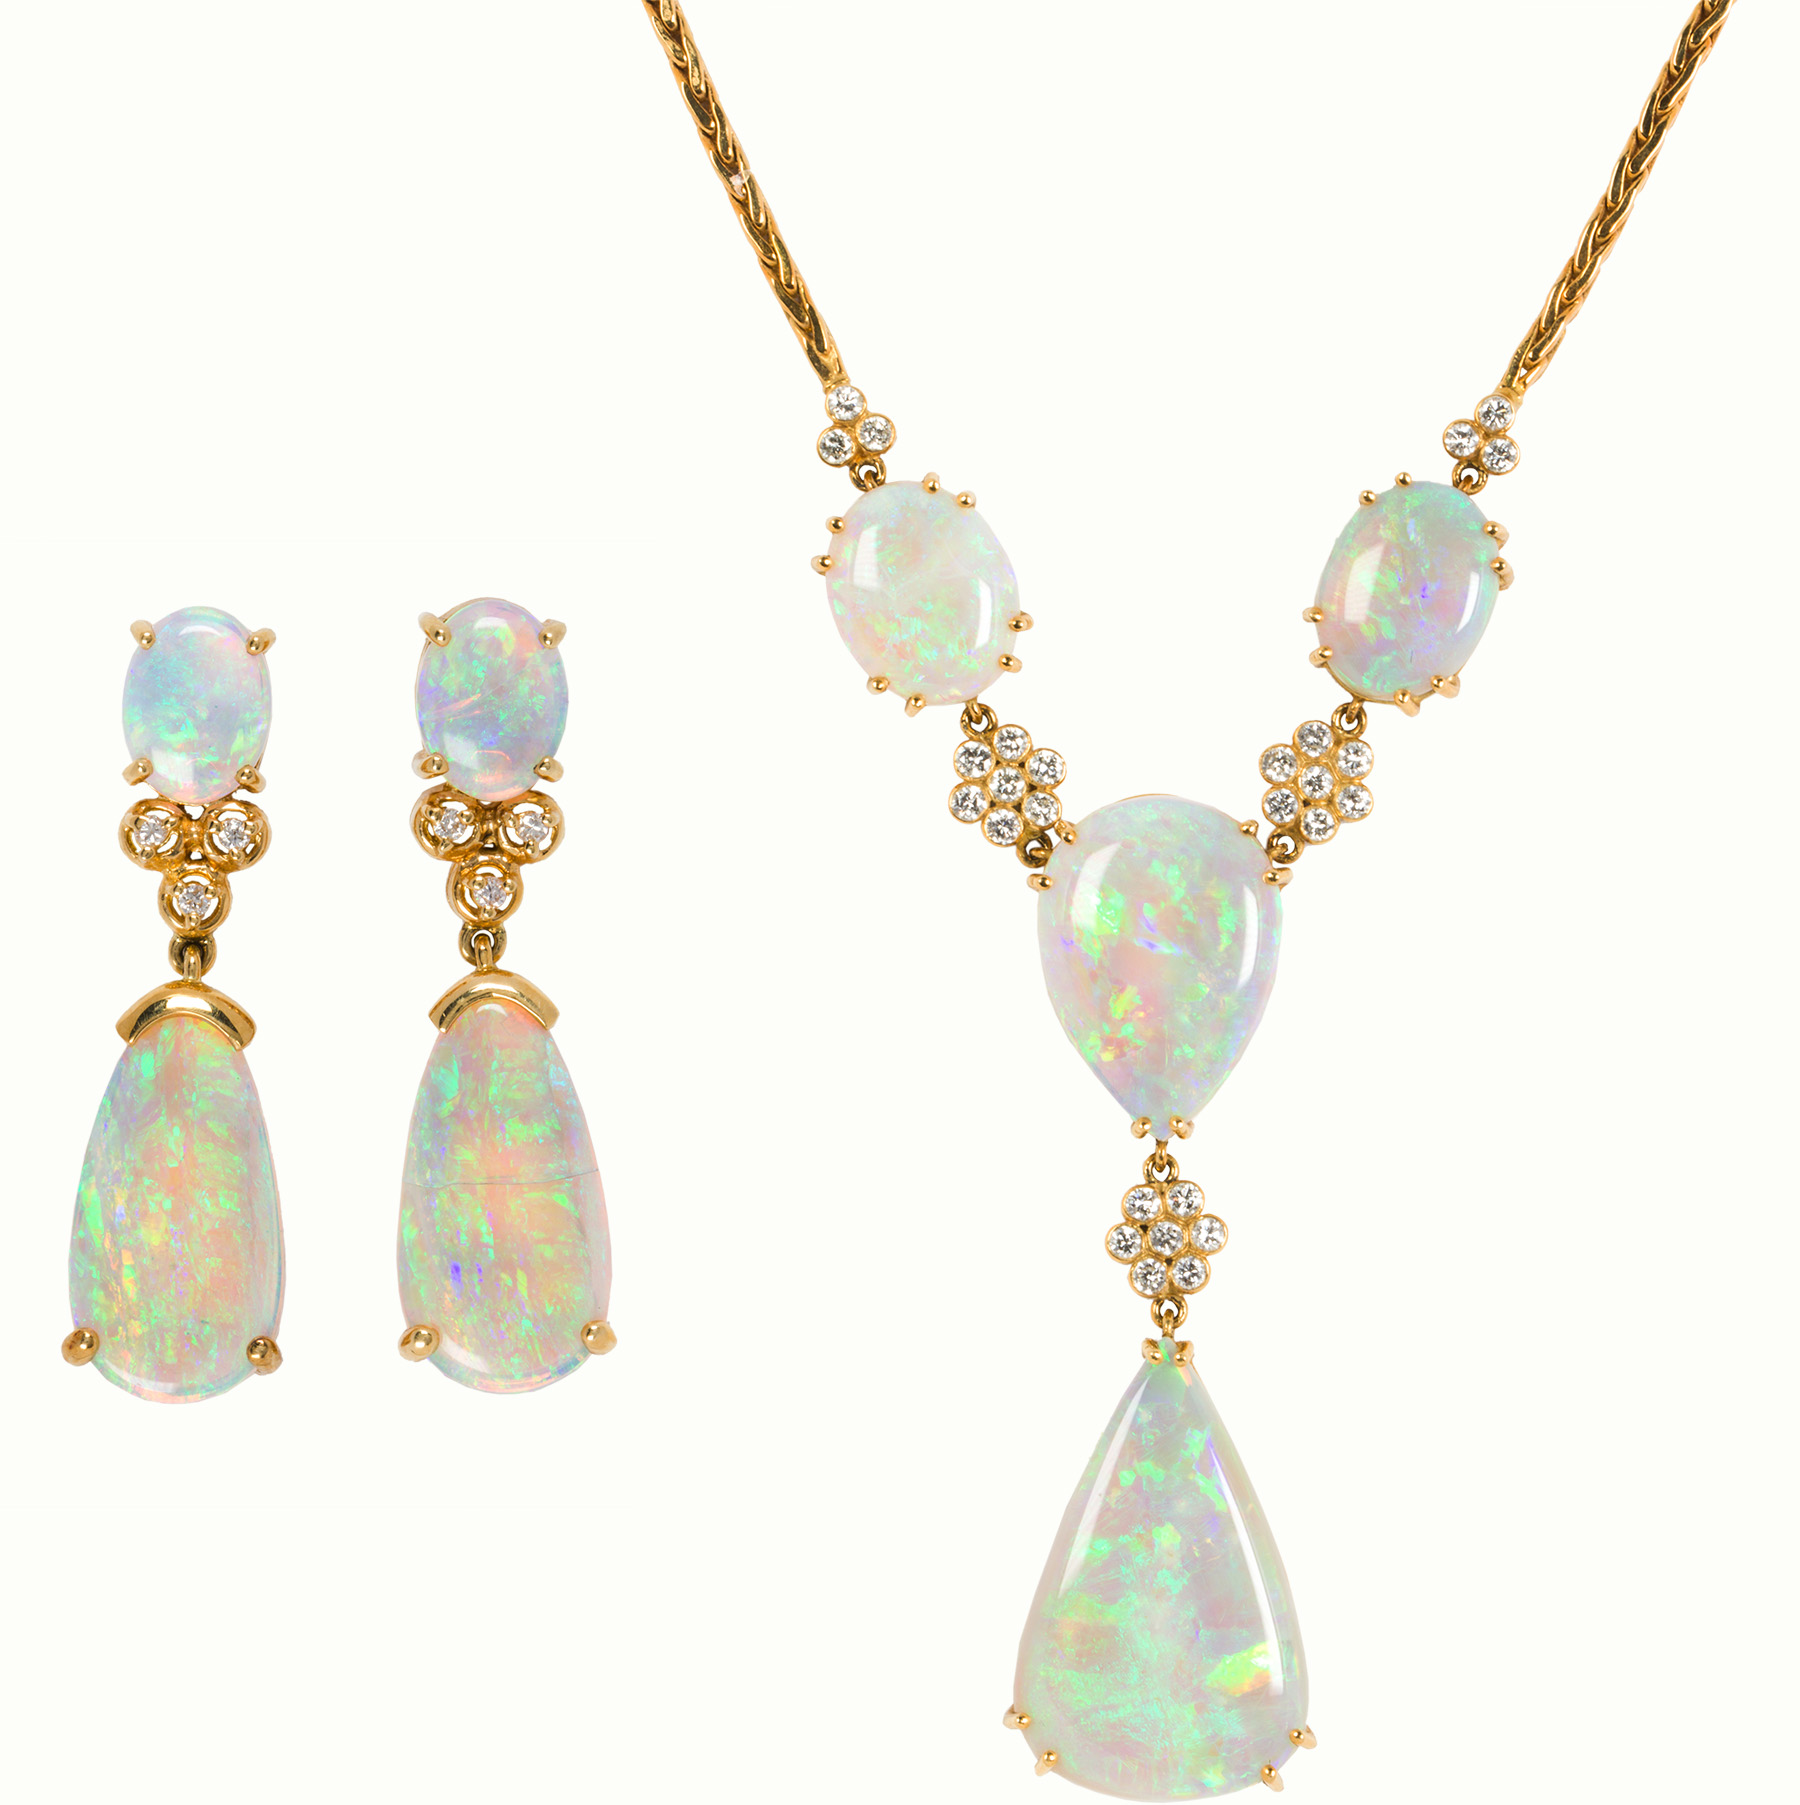 An opal, diamond and 18k gold necklace and earring set.